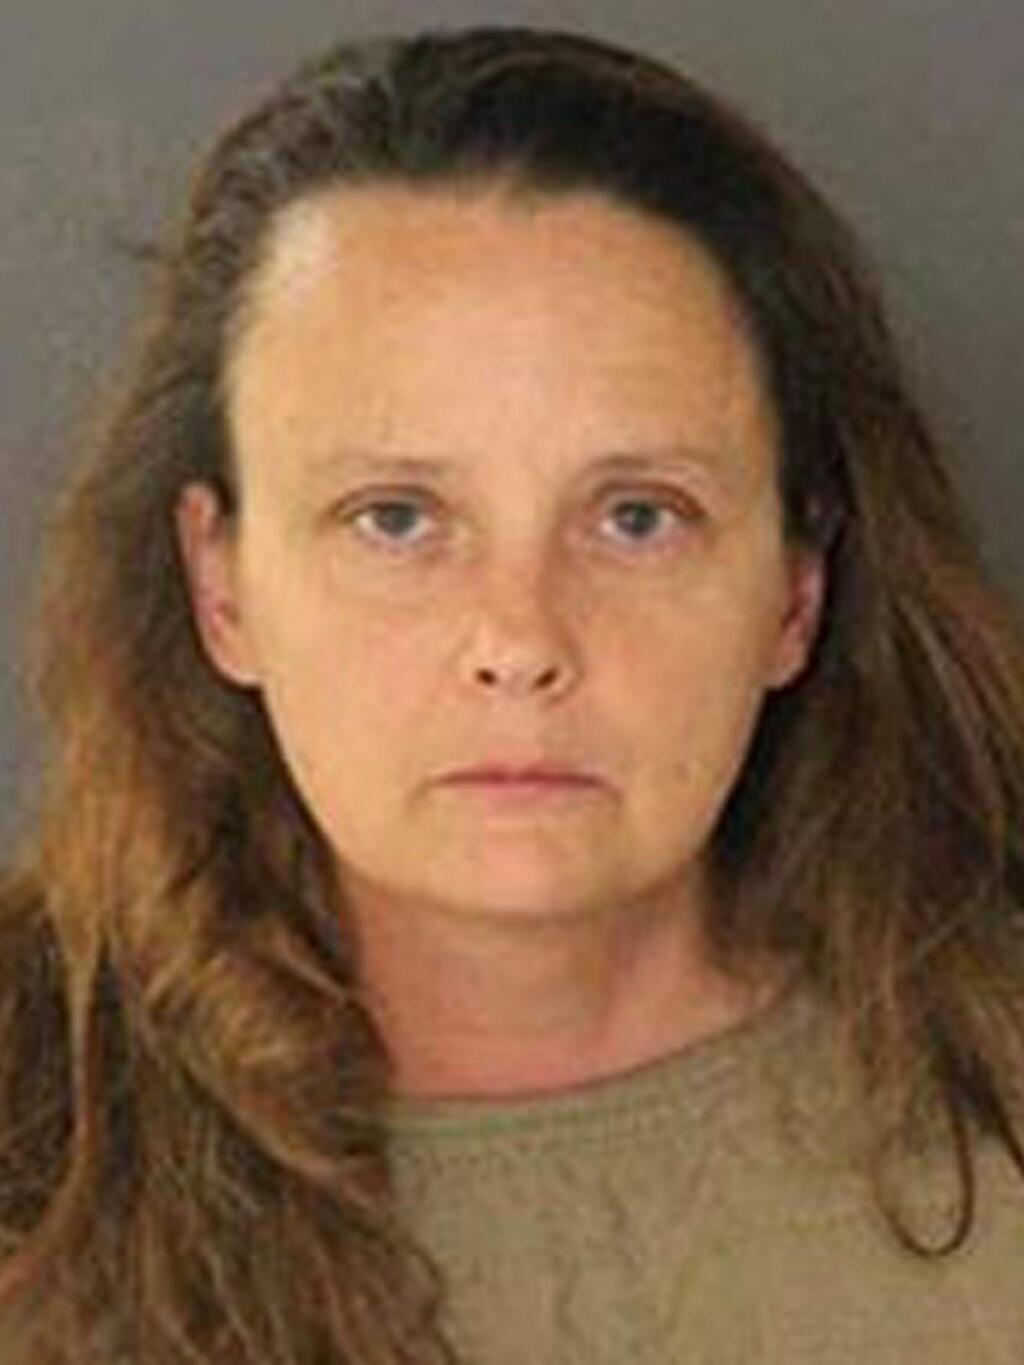 This photo released Thursday, Aug. 3, 2017, by San Jose Police Department shows suspect Gail Burnworth, a resident of Tacoma, Wash., who was one of two people arrested after a sharp-eyed airline passenger saw another traveler texting about sexually assaulting children. San Jose police say they arrested 56-year-old Michael Kellar in the city's airport Monday night after a flight from Seattle. Officers arrested 50-year-old Gail Burnworth in her Tacoma home. (San Jose Police Department via AP)